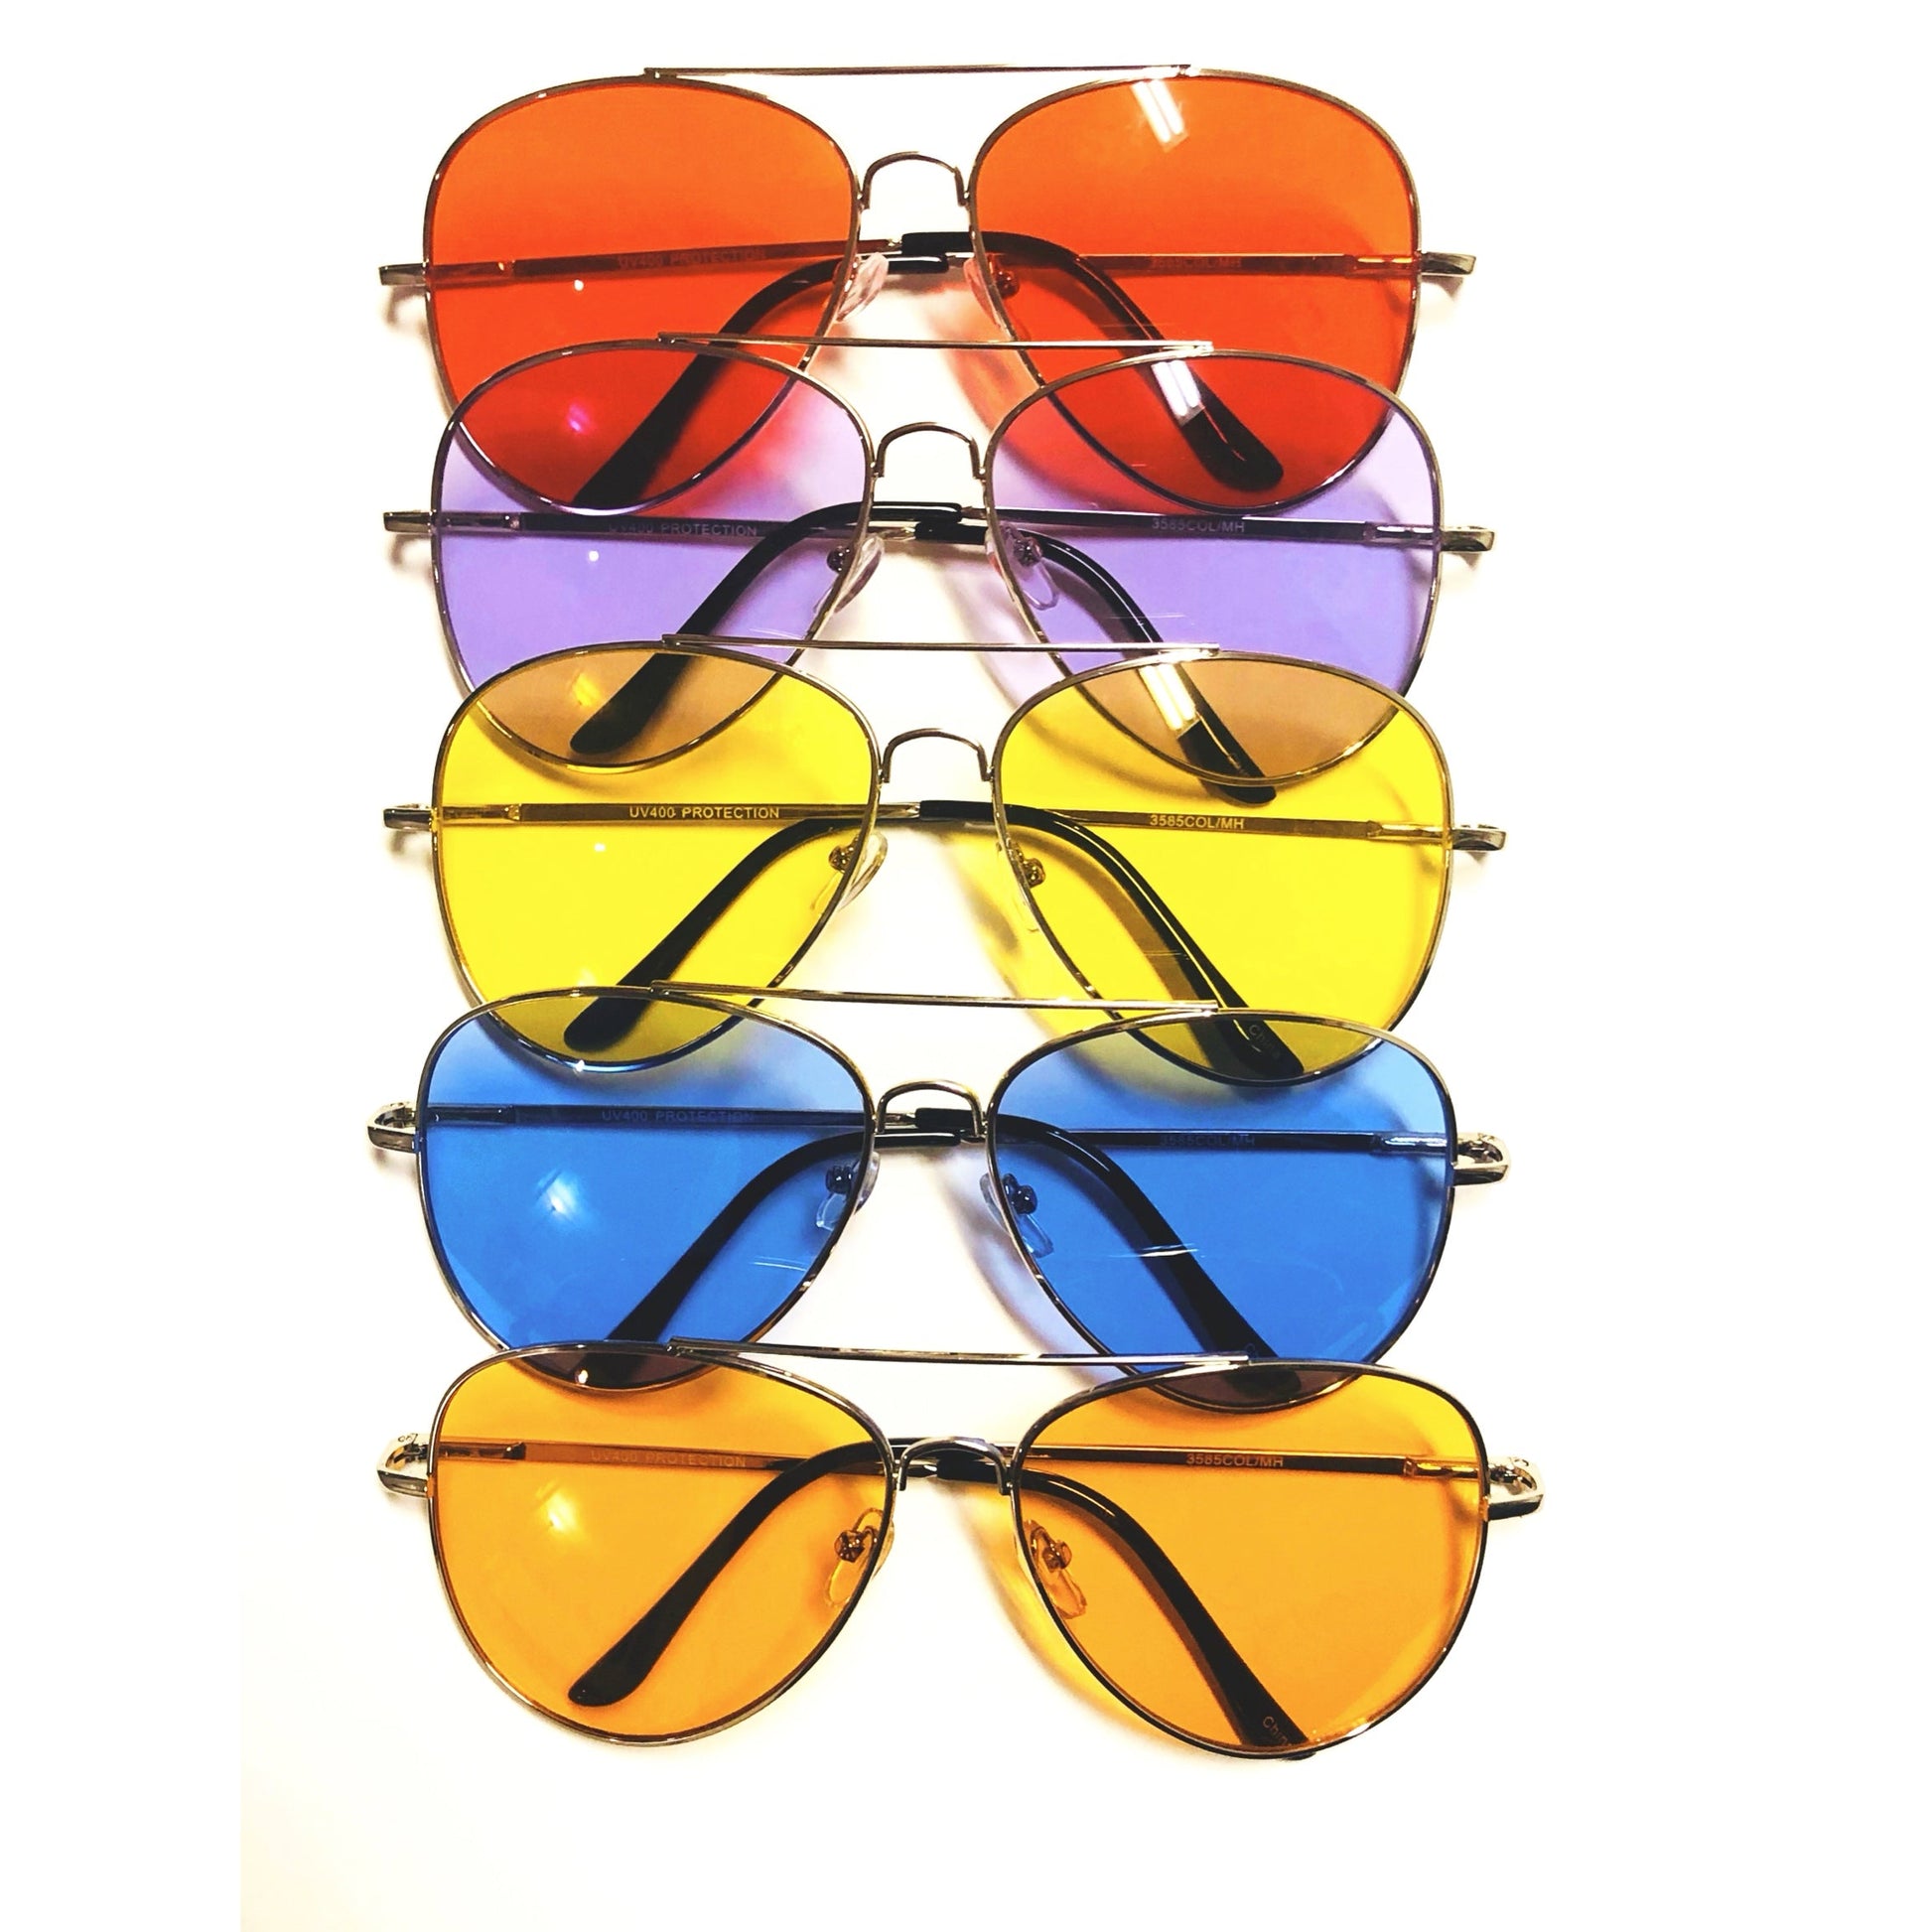 Calm Color unisex Aviator Sunglasses transparent  red blue yellow purple or orange with silver metal frame